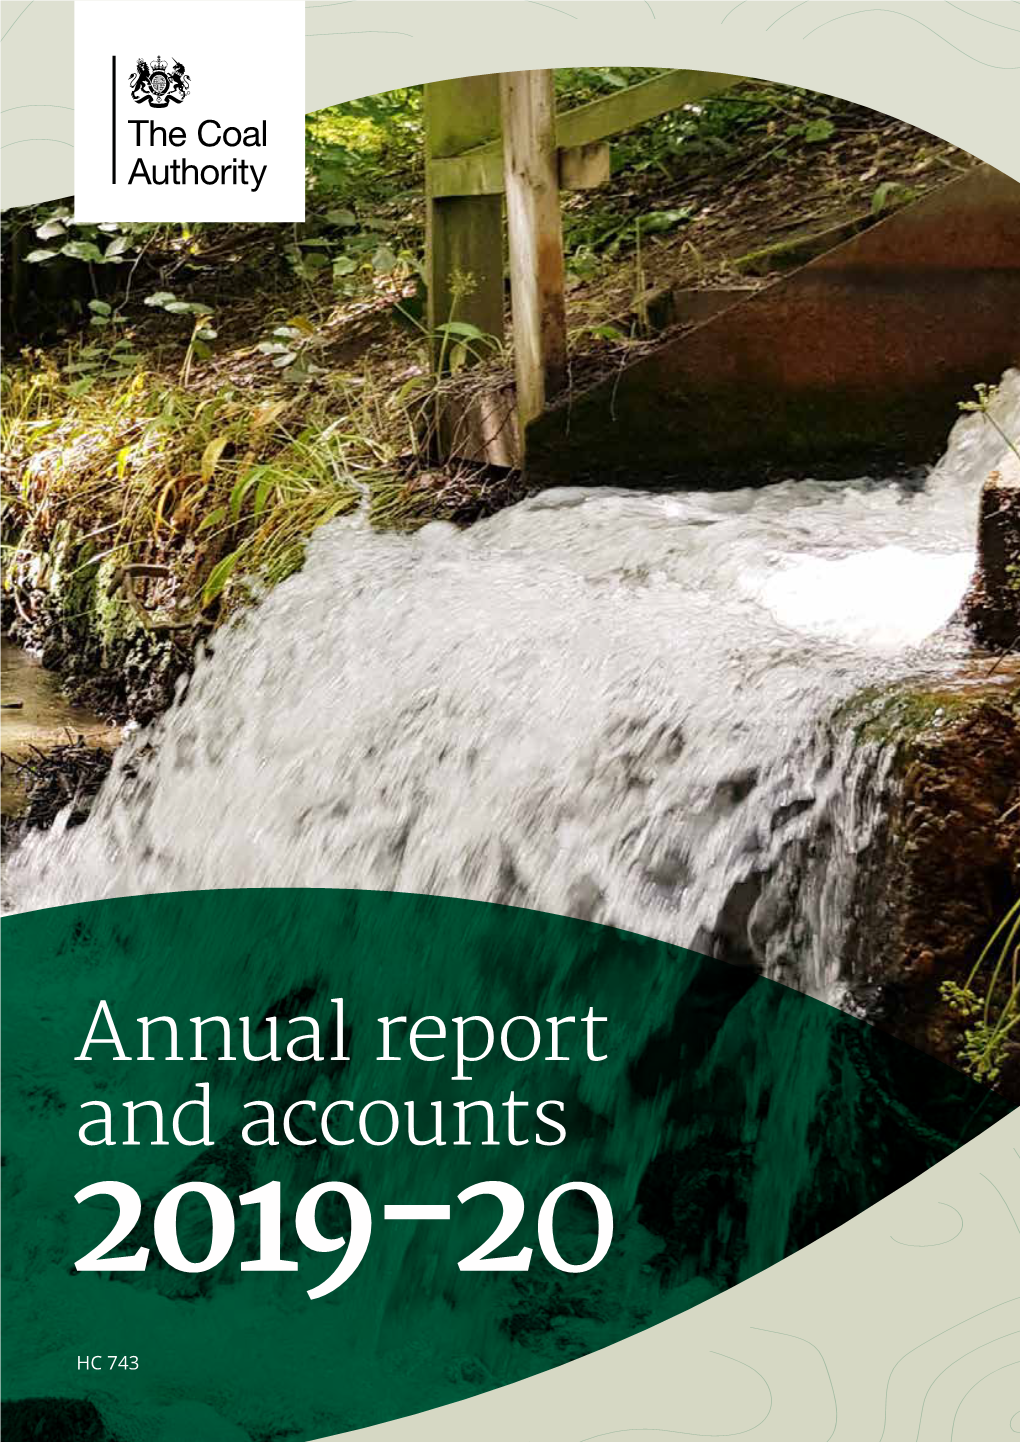 HC 2302 the Coal Authority Annual Report and Accounts 2019-20